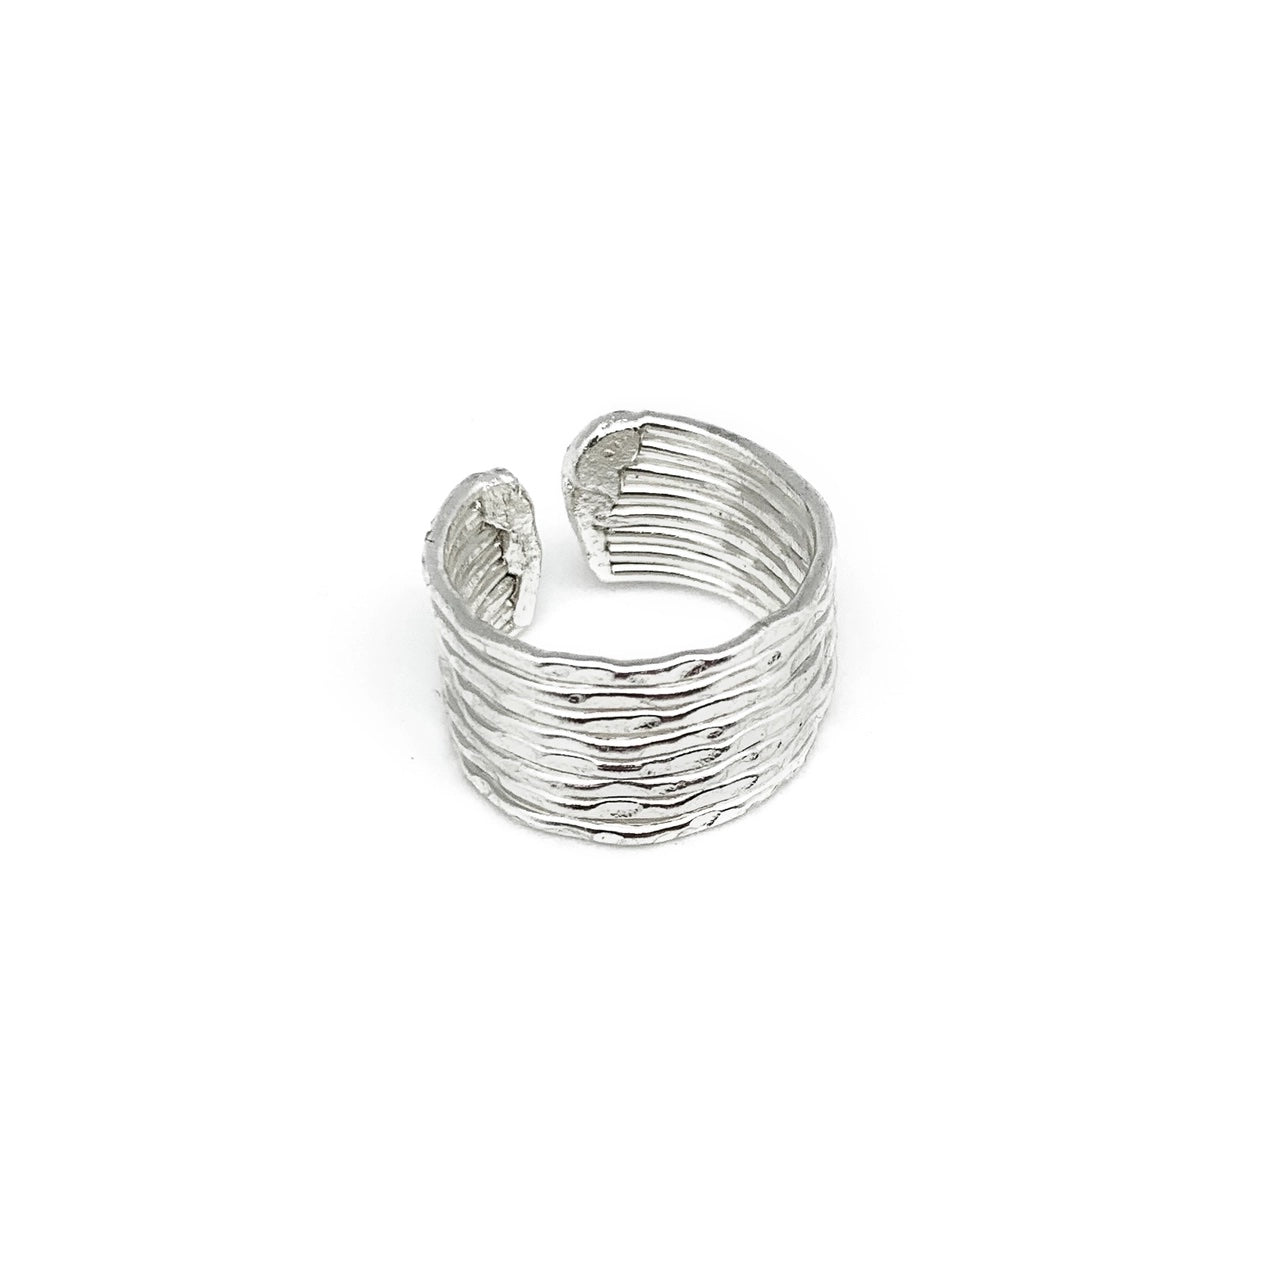 Anju Jewelry Silver Hammered Band Ring